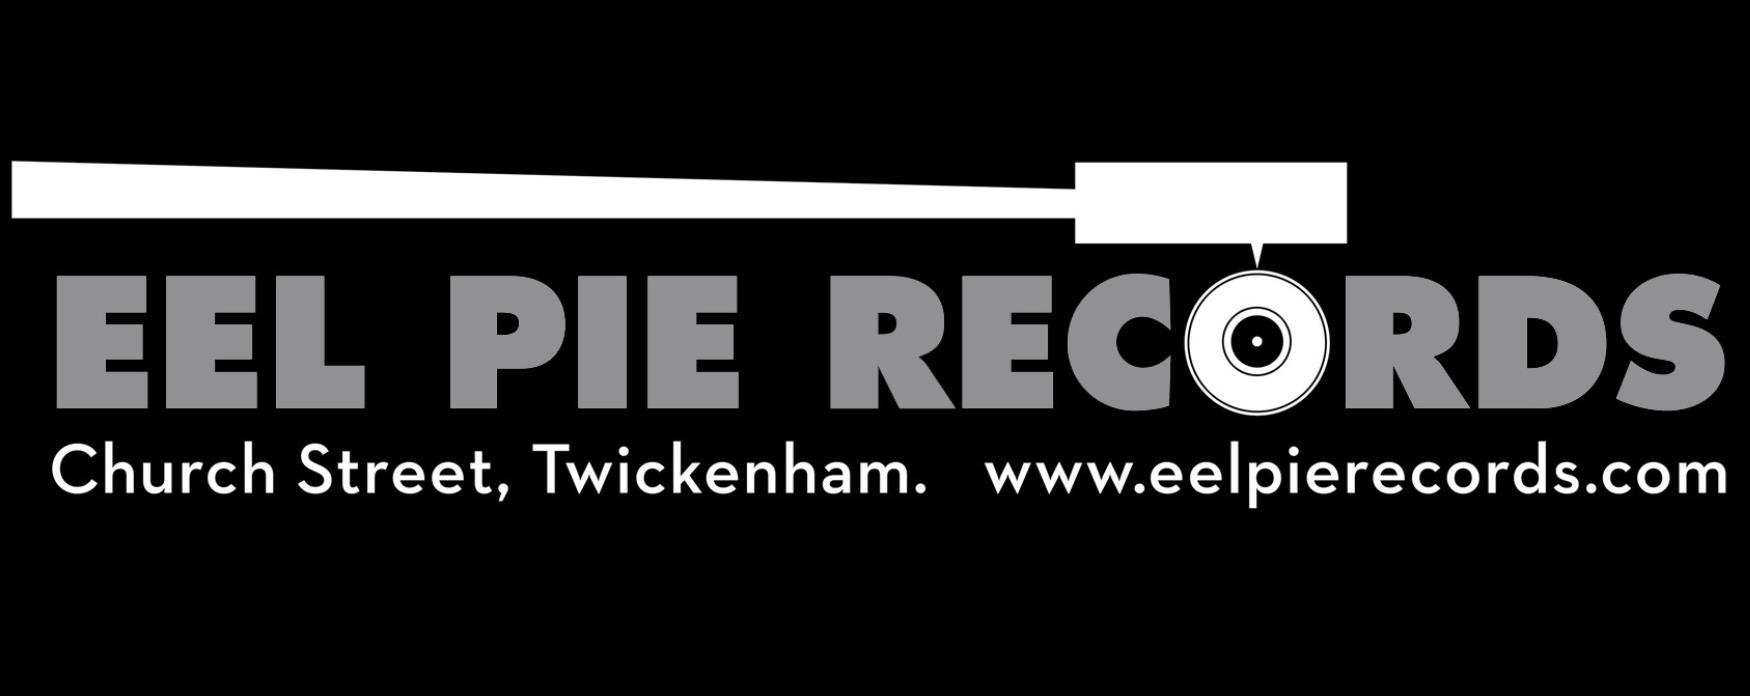 An image of the logo of Eel Pie Records